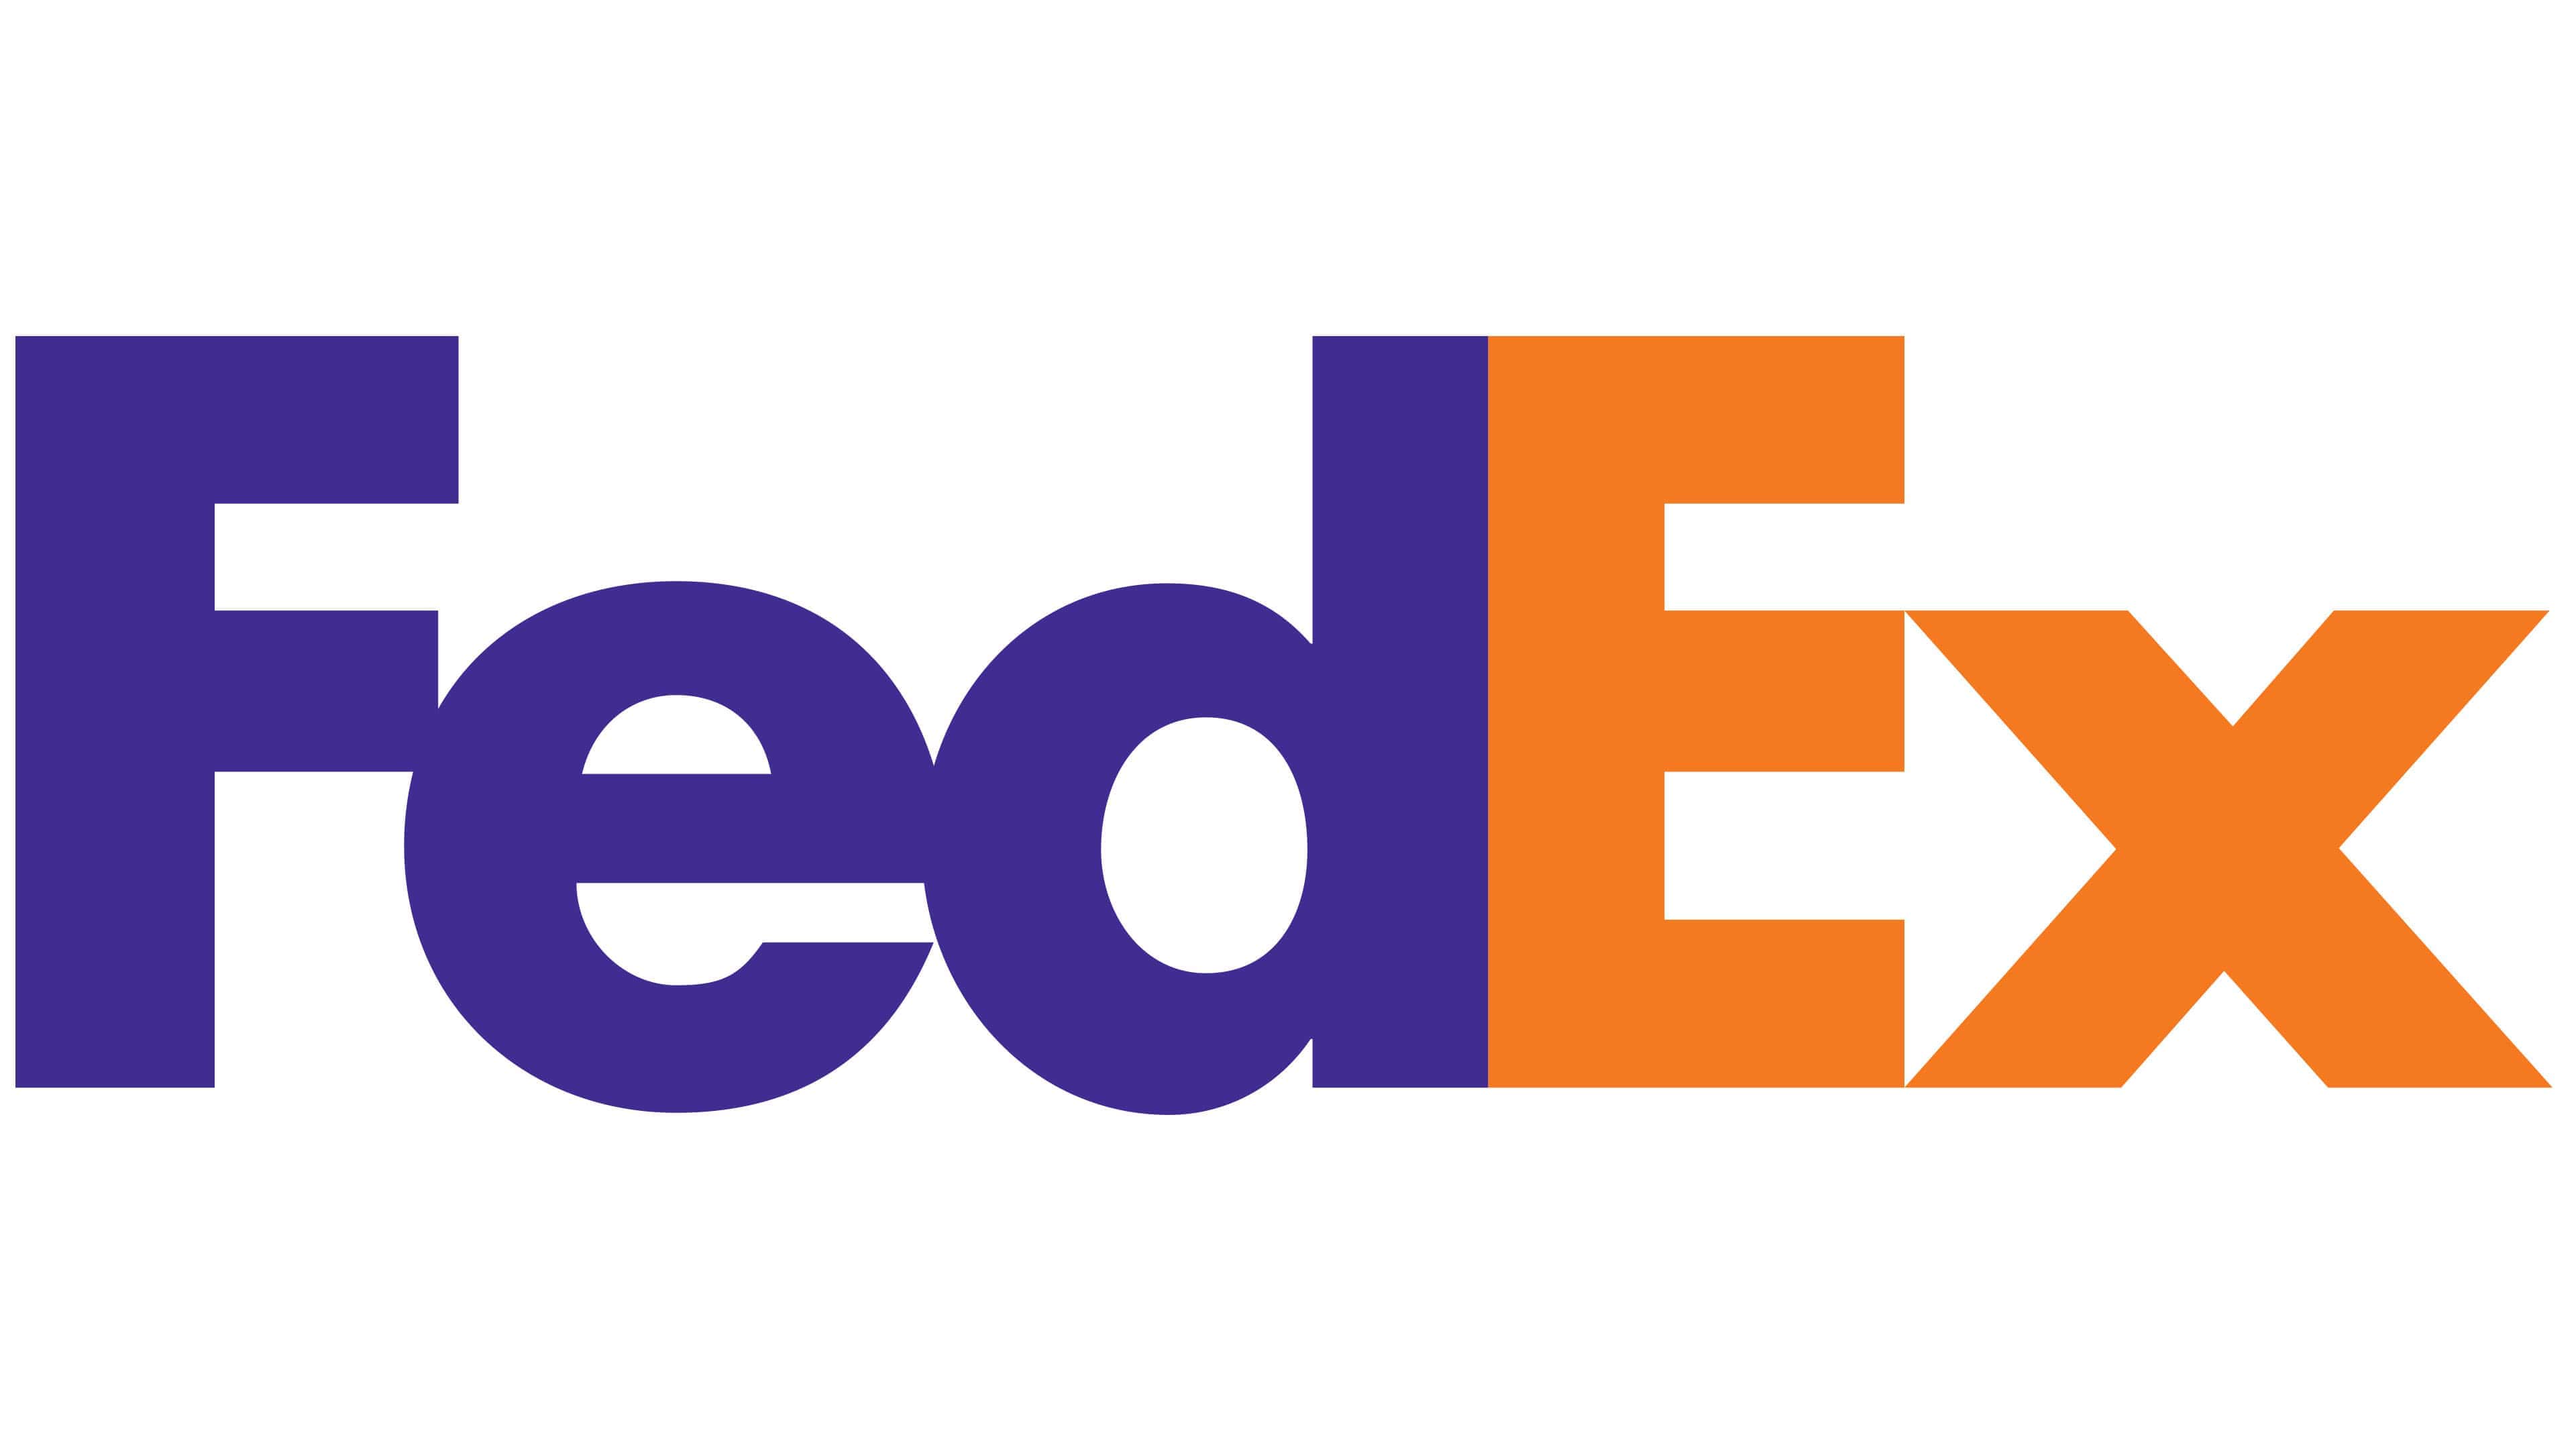 FedEx Logo, PNG, Symbol, History, Meaning